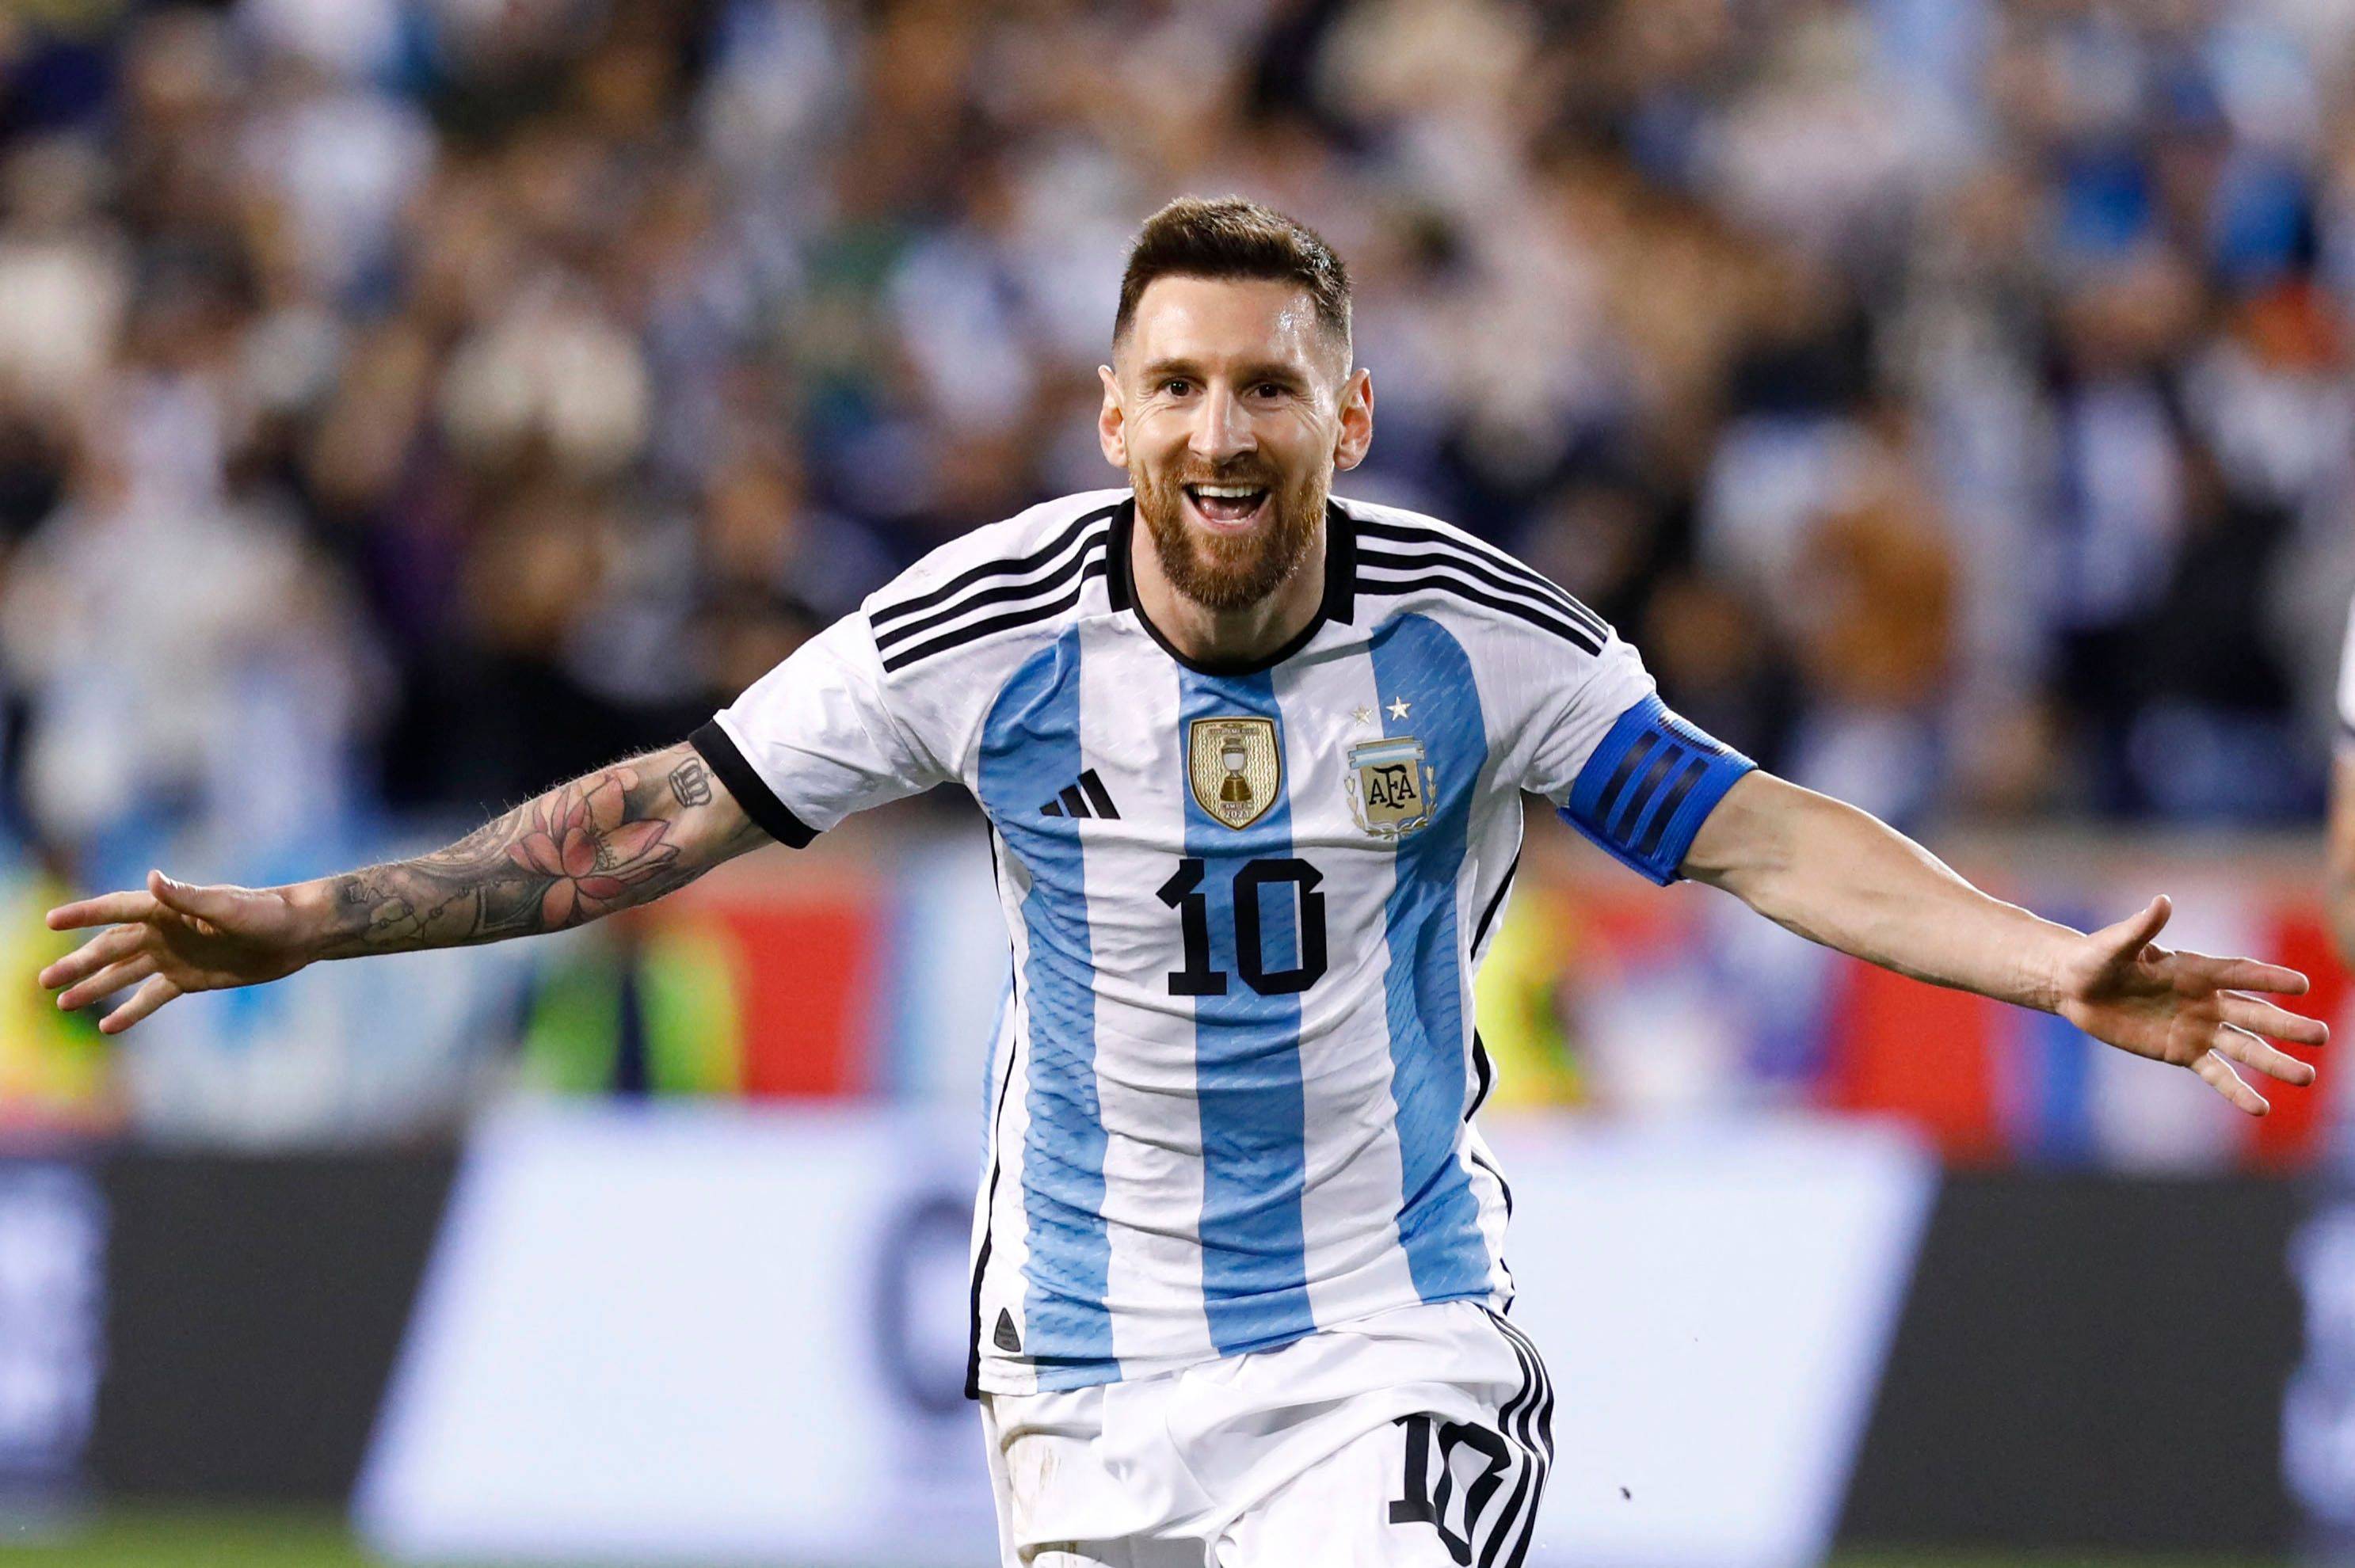 World Cup 2022 champions gear: Get Messi, Argentina jerseys, hats, more 